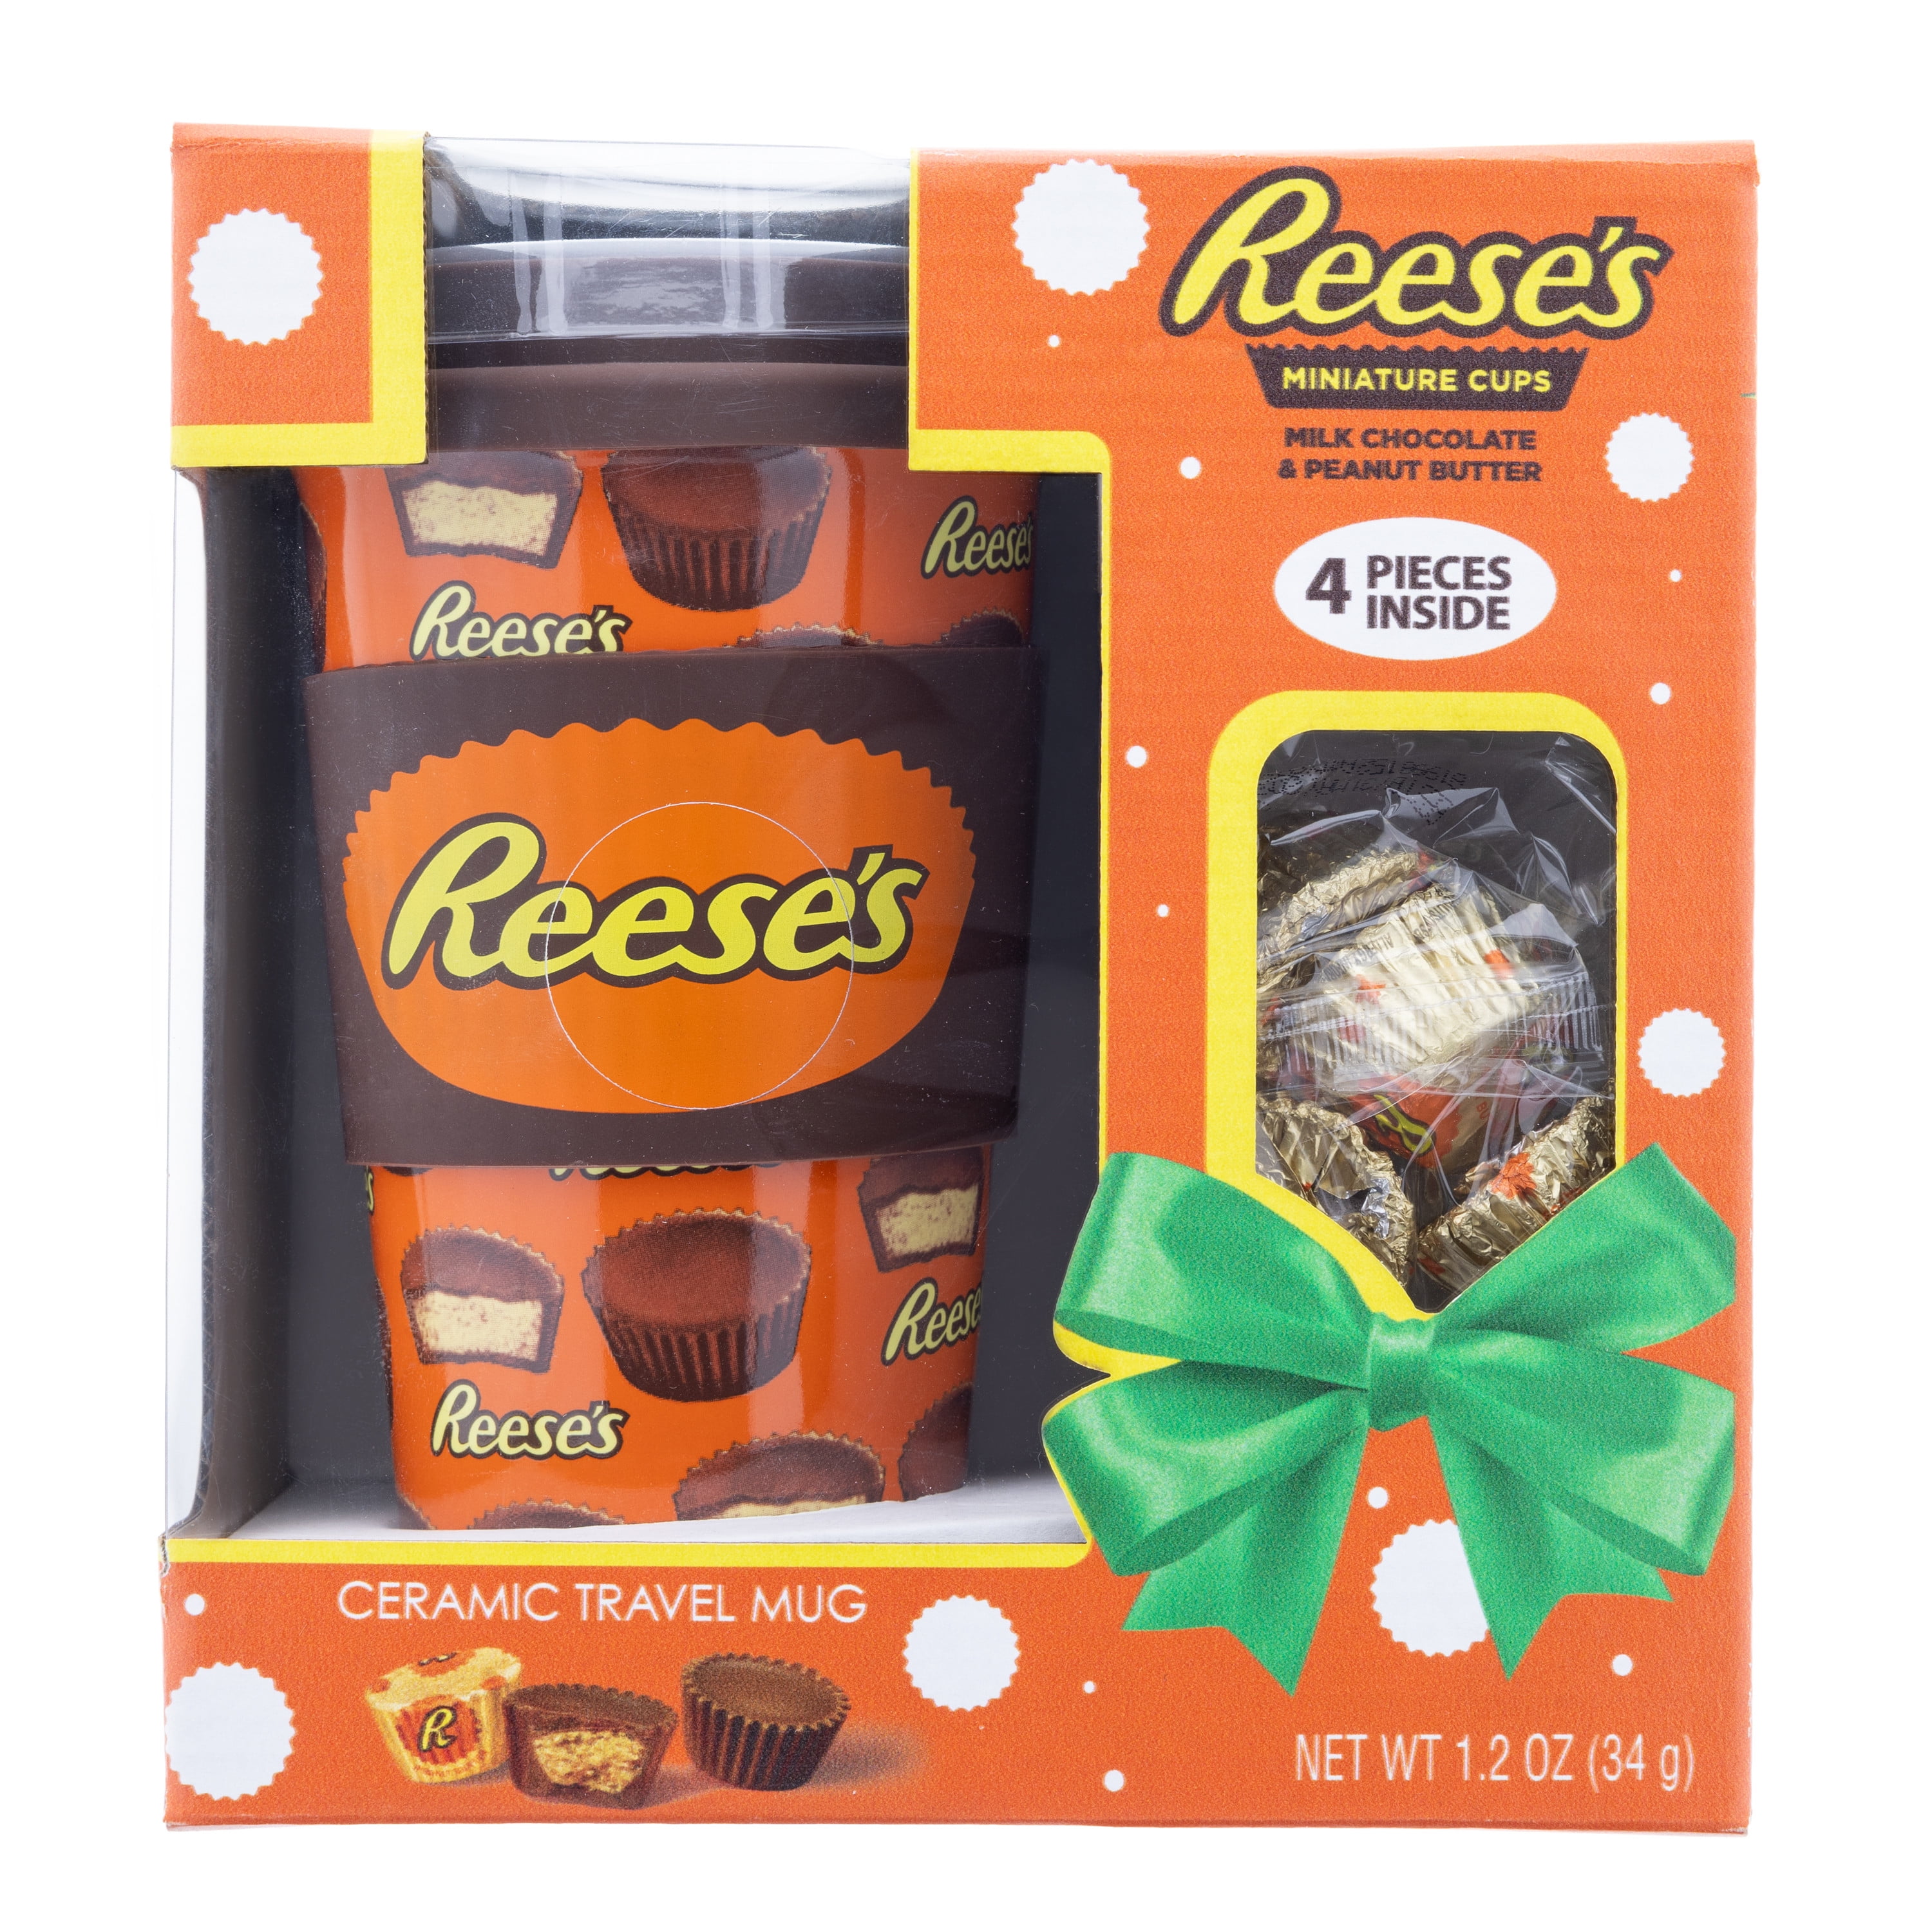 Galerie Hershey's Reese's Ceramic Travel Mug with Reese's Miniature Cups, 1.2 oz